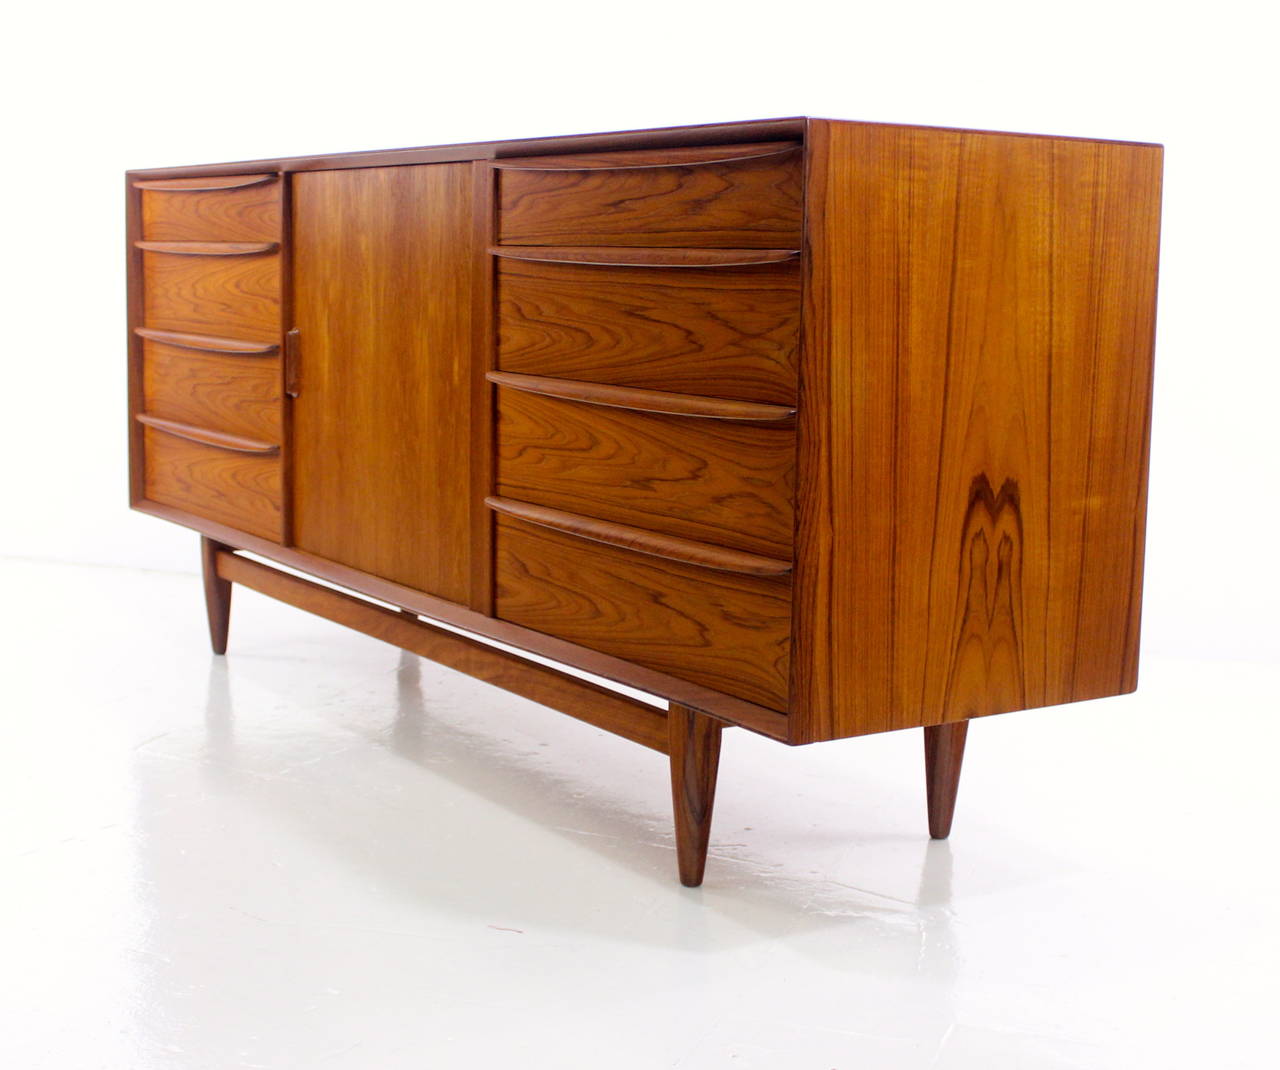 Danish modern dresser chest by Falster Møbelfabrik.
Richly grained teak with birch interior.
Tambour door in middle glides open to five drawers.
Four drawers, with sculptured handles, on each end.
Finished on the back for 360 degree